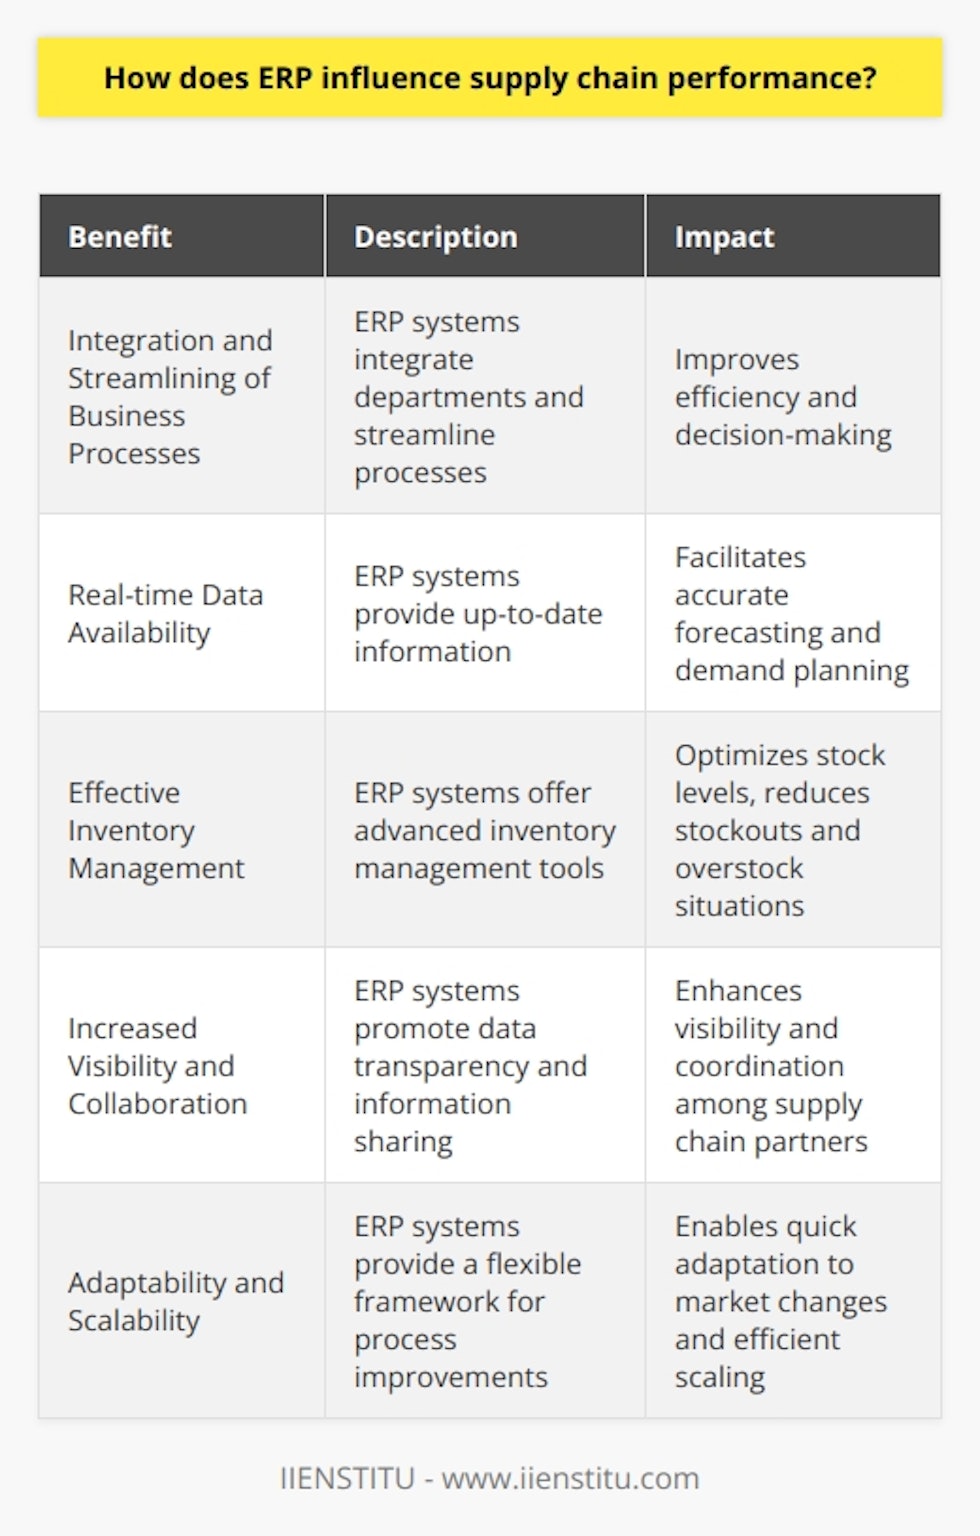 ERP systems have a significant impact on supply chain performance. They integrate and streamline business processes, resulting in improved efficiency and enhanced decision-making. By integrating various departments, such as procurement, production, sales, and logistics, ERP systems enable seamless communication and coordination. This integration reduces lead times and improves overall supply chain performance.One of the key benefits of ERP systems is the availability of real-time data. Accurate forecasting and demand planning are crucial for supply chain efficiency, and ERP systems provide up-to-date information that facilitates decision-making and responsiveness to market changes. Organizations can use this real-time data to make informed decisions and adapt quickly to evolving market demands.Effective inventory management is another area where ERP systems make a significant impact. These systems offer advanced inventory management tools that help monitor stock levels, track inventory, and maintain optimum stock levels. By reducing stockouts and overstock situations, ERP systems optimize inventory management, thereby improving supply chain efficiency.ERP systems also increase visibility and promote collaboration among supply chain partners. By breaking down information silos and promoting data transparency, these systems enable greater visibility across all tiers of the supply chain. This enhanced visibility encourages information sharing, collaboration, and better coordination among partners, leading to improved supply chain performance.Furthermore, ERP systems provide organizations with the adaptability and scalability to meet changing market conditions. They offer a flexible framework that supports continuous process improvements, enabling organizations to adapt quickly to market changes and efficiently scale their operations. This adaptability and scalability contribute to supply chain optimization and long-term competitiveness.In conclusion, ERP systems have a significant influence on supply chain performance. By providing an integrated platform for decision-making, increasing visibility and collaboration, optimizing inventory management, and enhancing adaptability, these systems empower organizations to achieve improved supply chain efficiency and competitiveness.